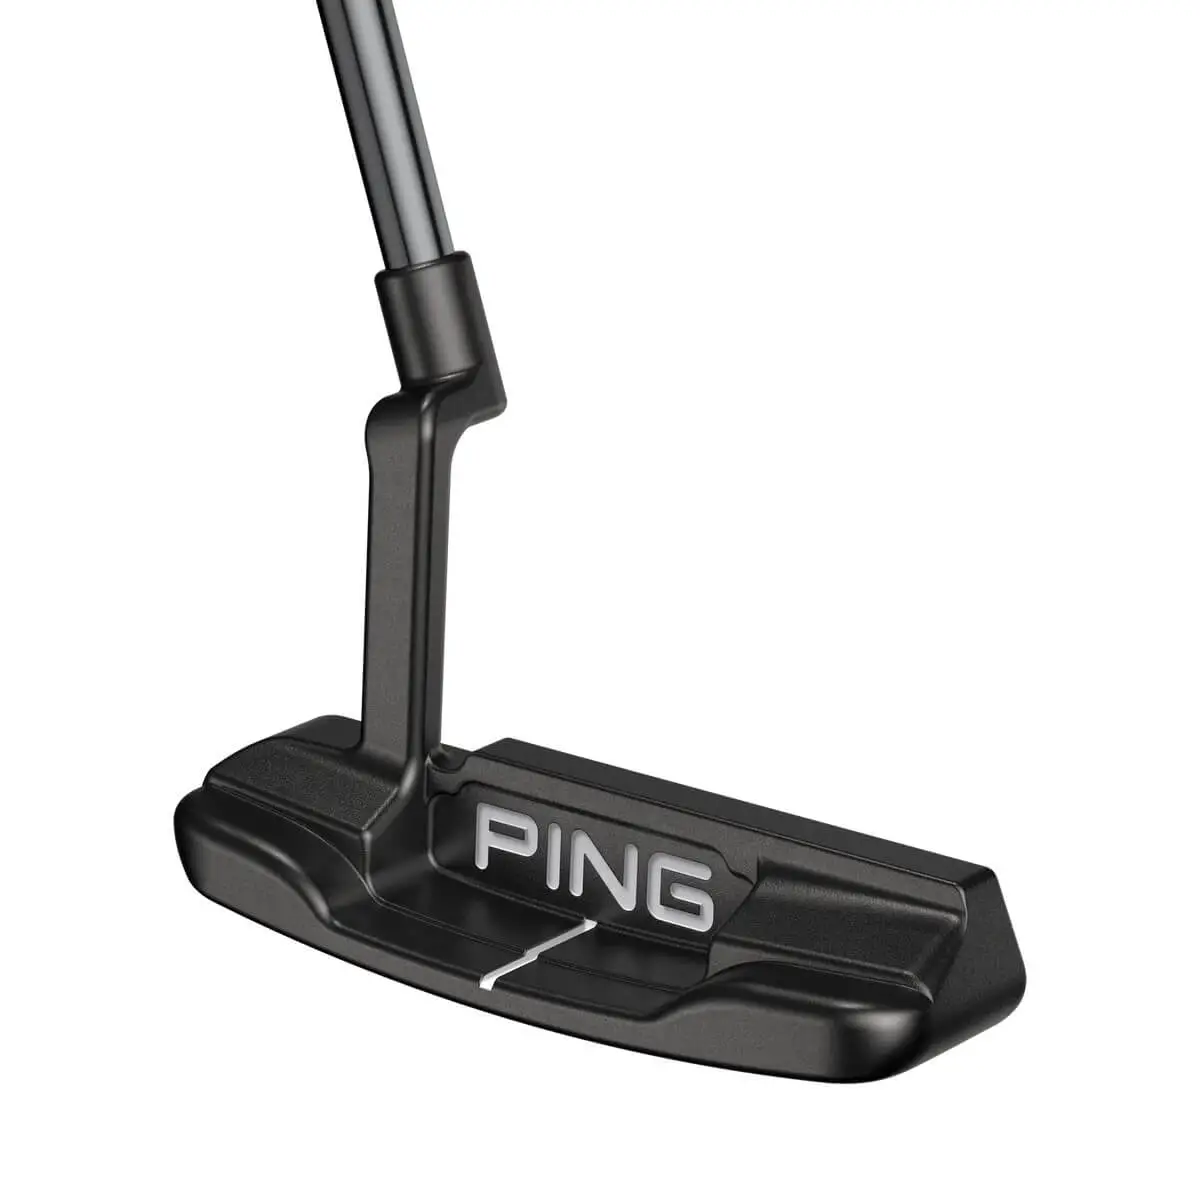 Best Plumber's Neck Putters - 2021 Buyer's Guide